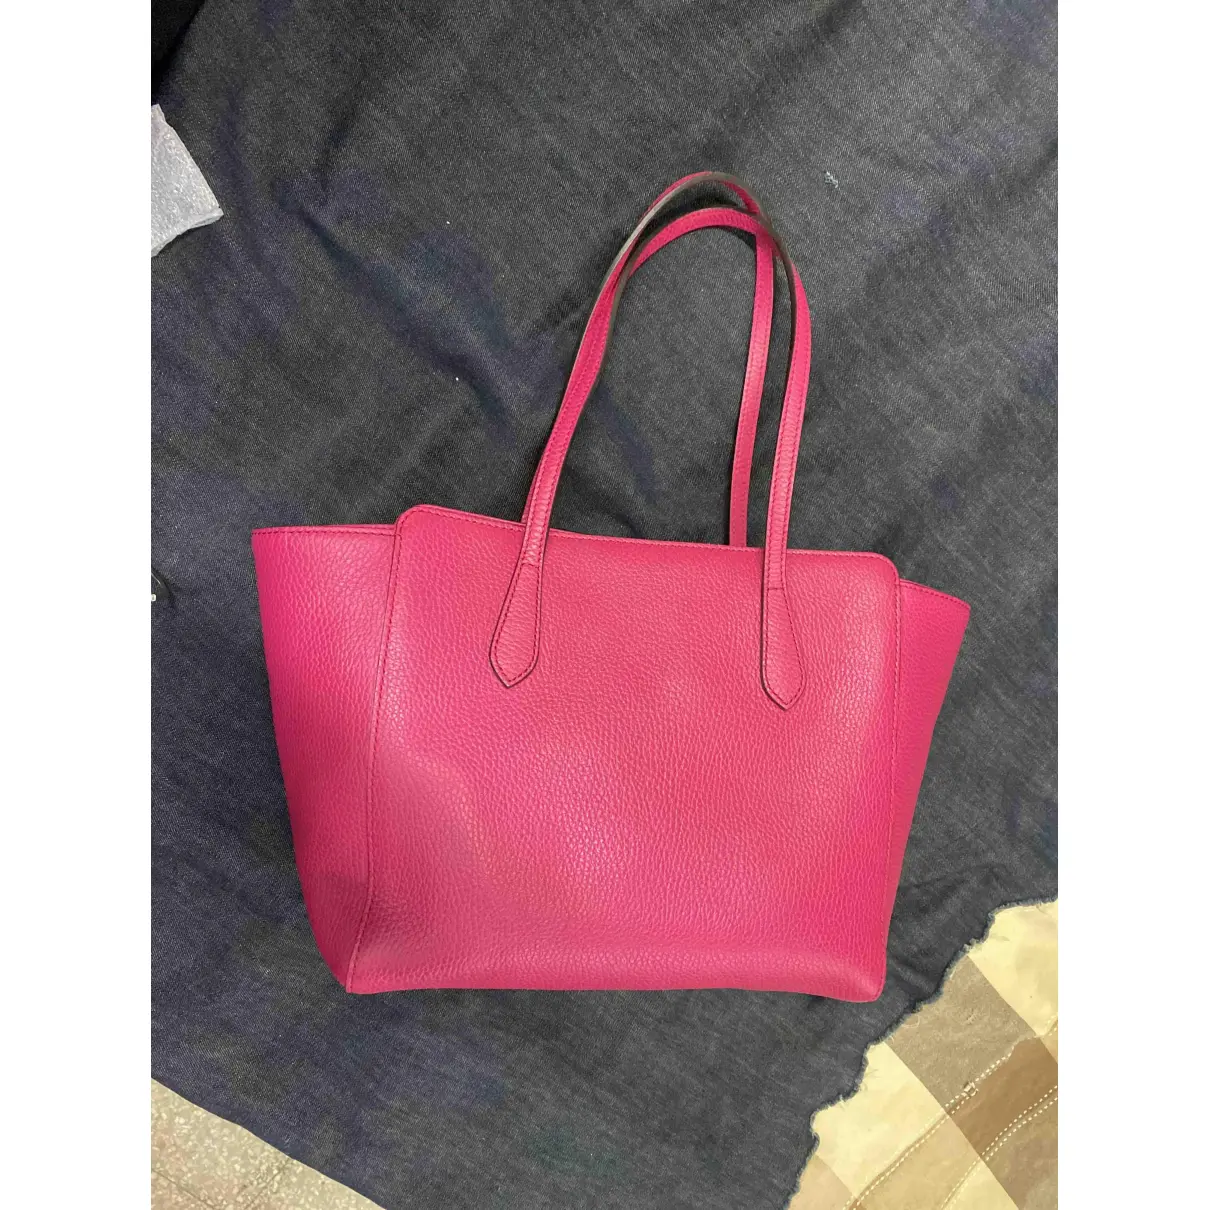 Buy Gucci Swing leather tote online